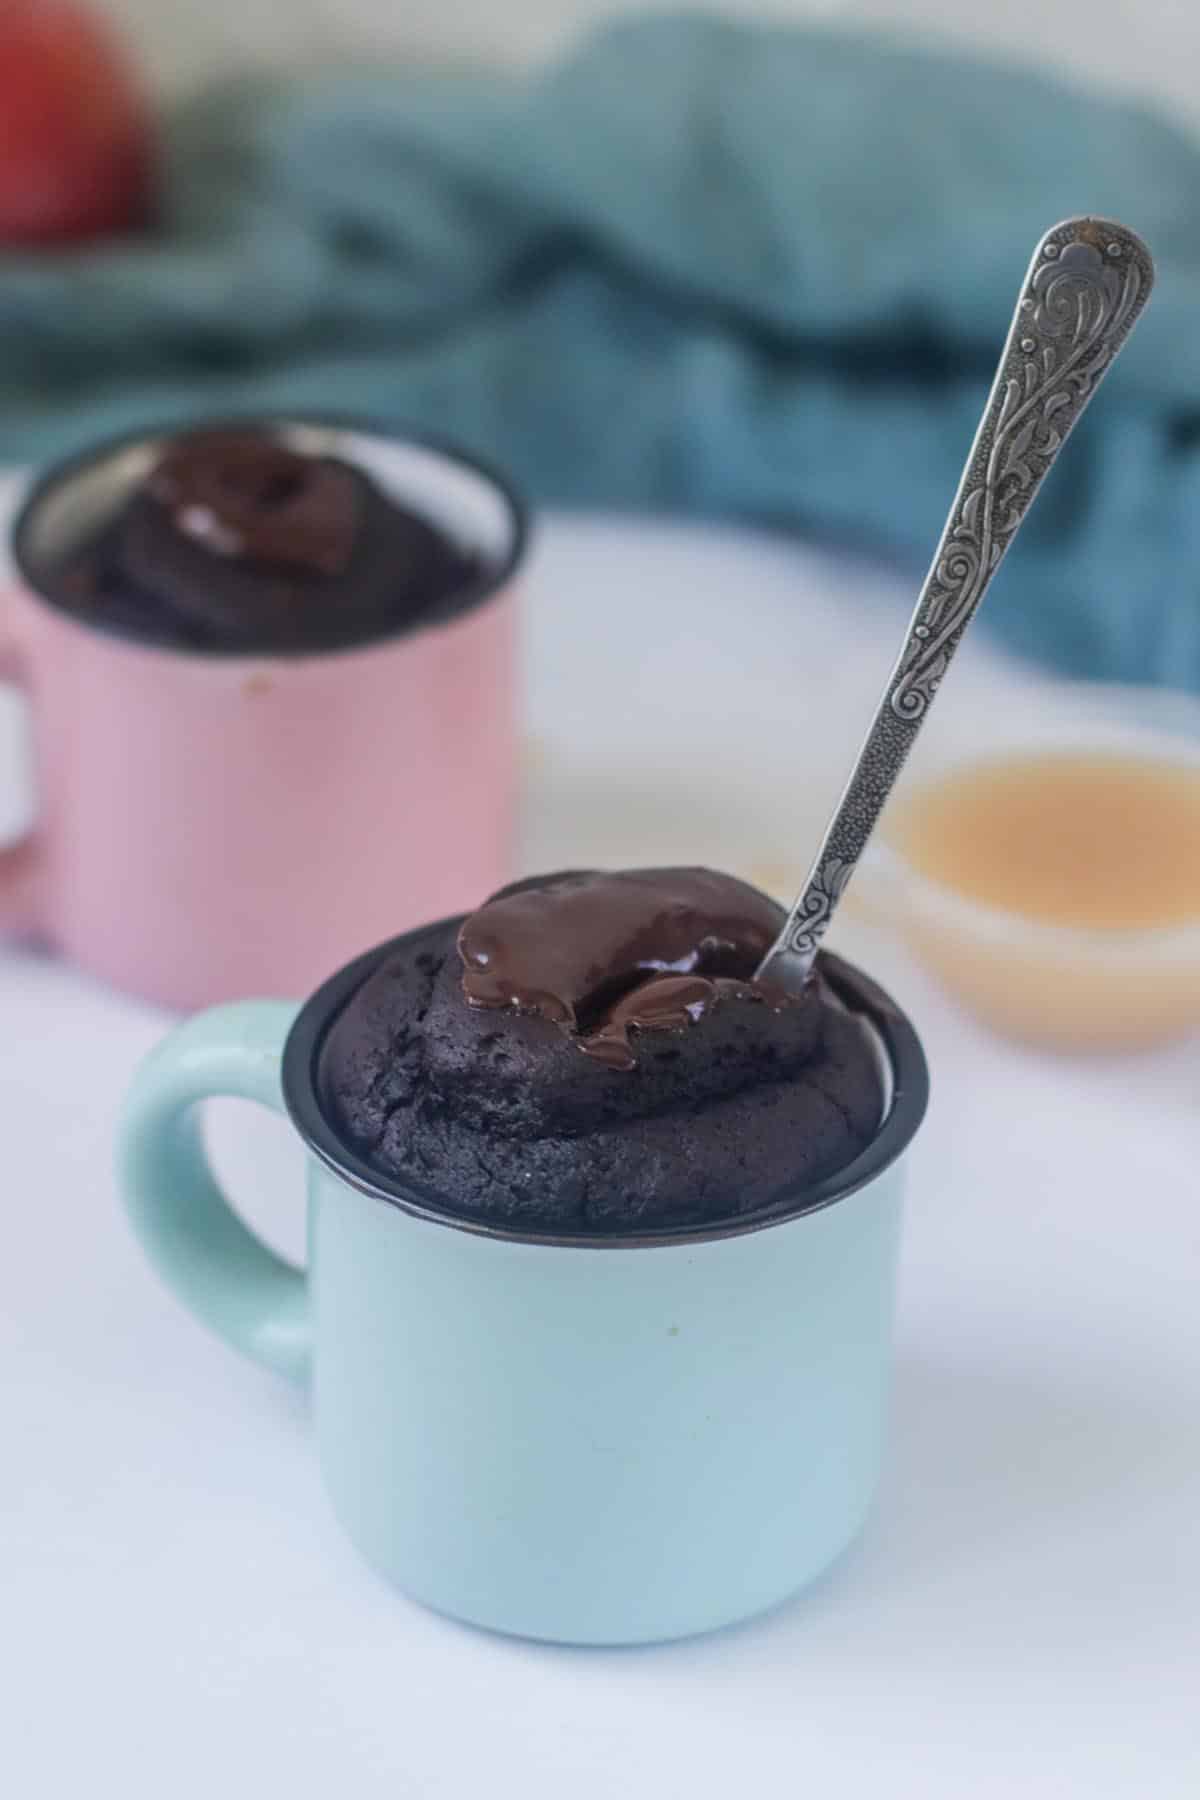 A spoon stuck in a mug with cake.